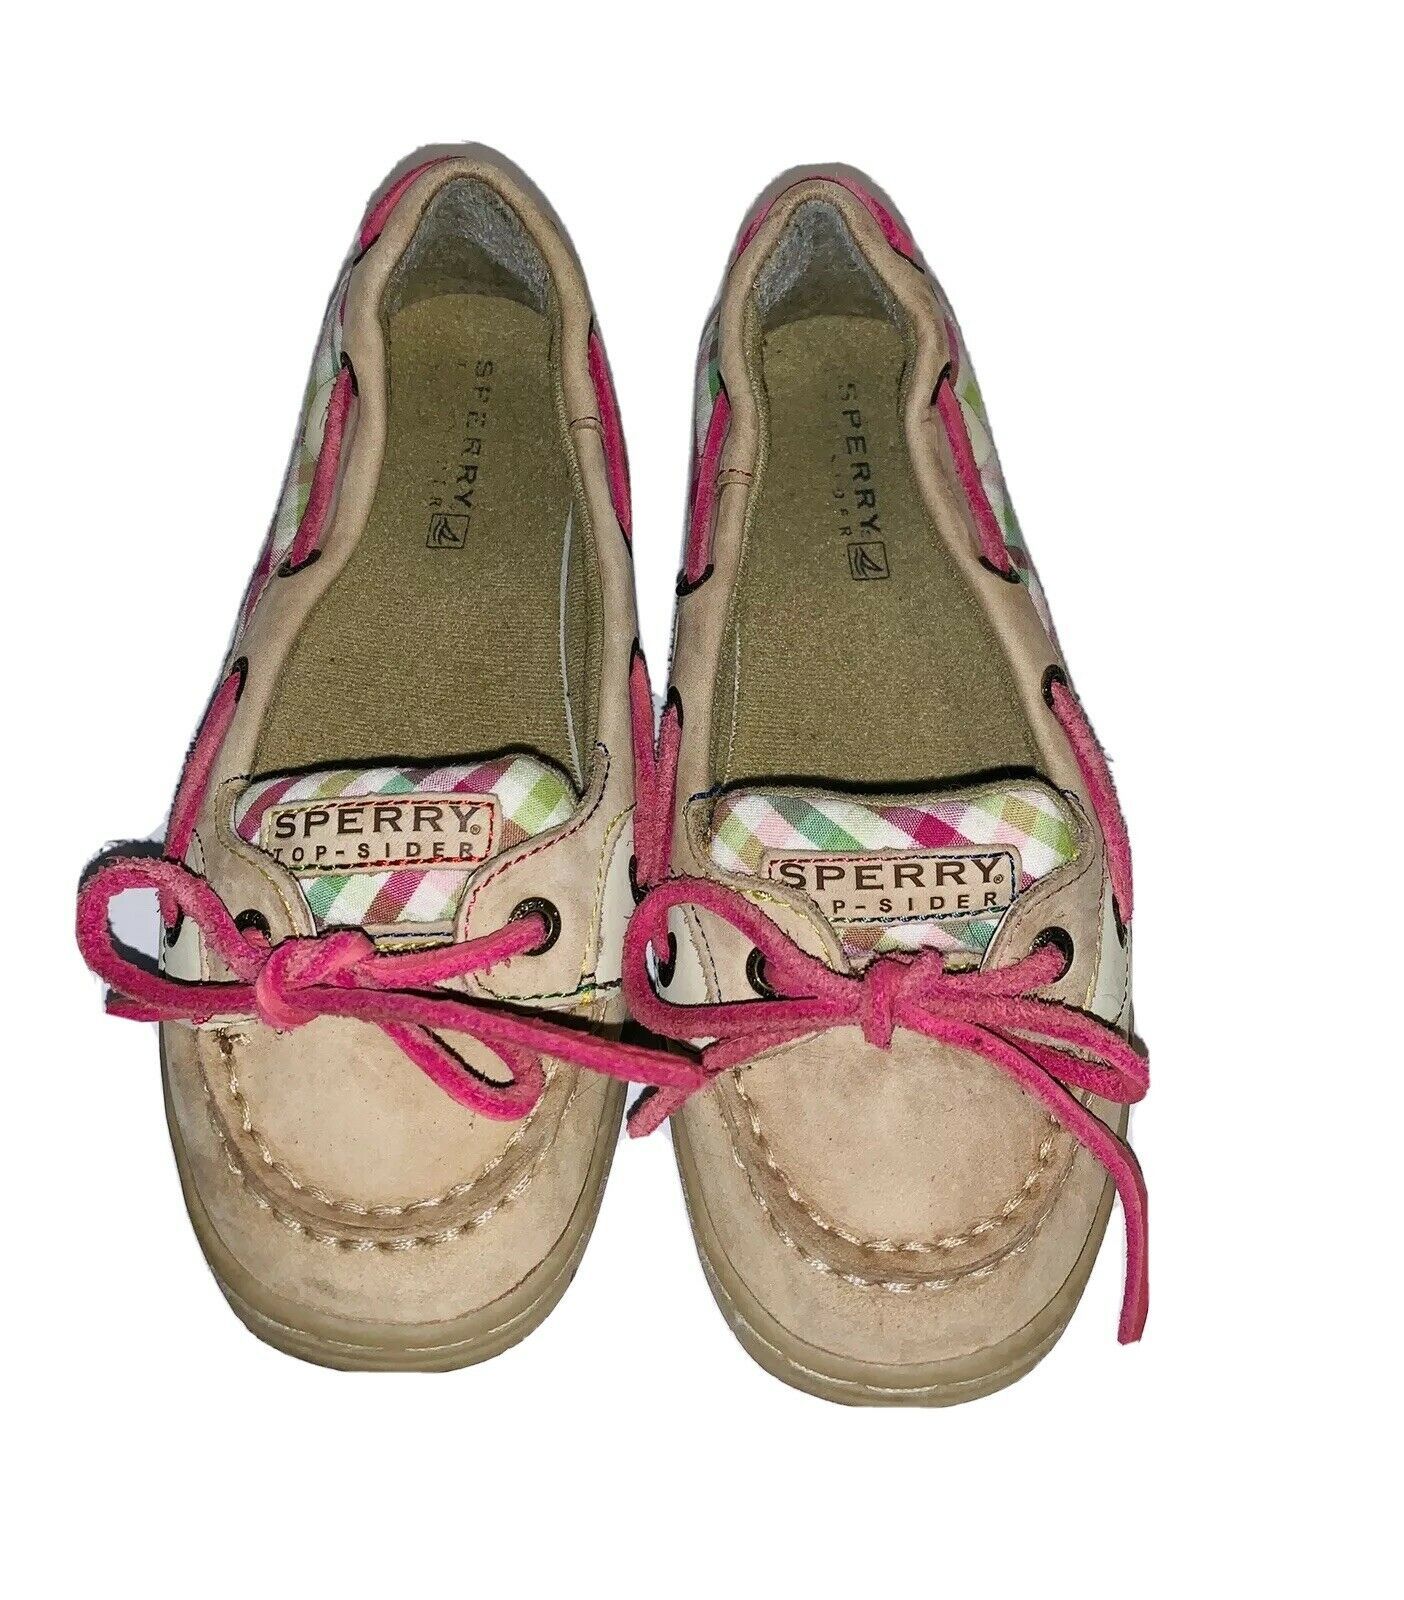 Primary image for Girls Sperry Angelfish Boat Shoes  Size 2.5M